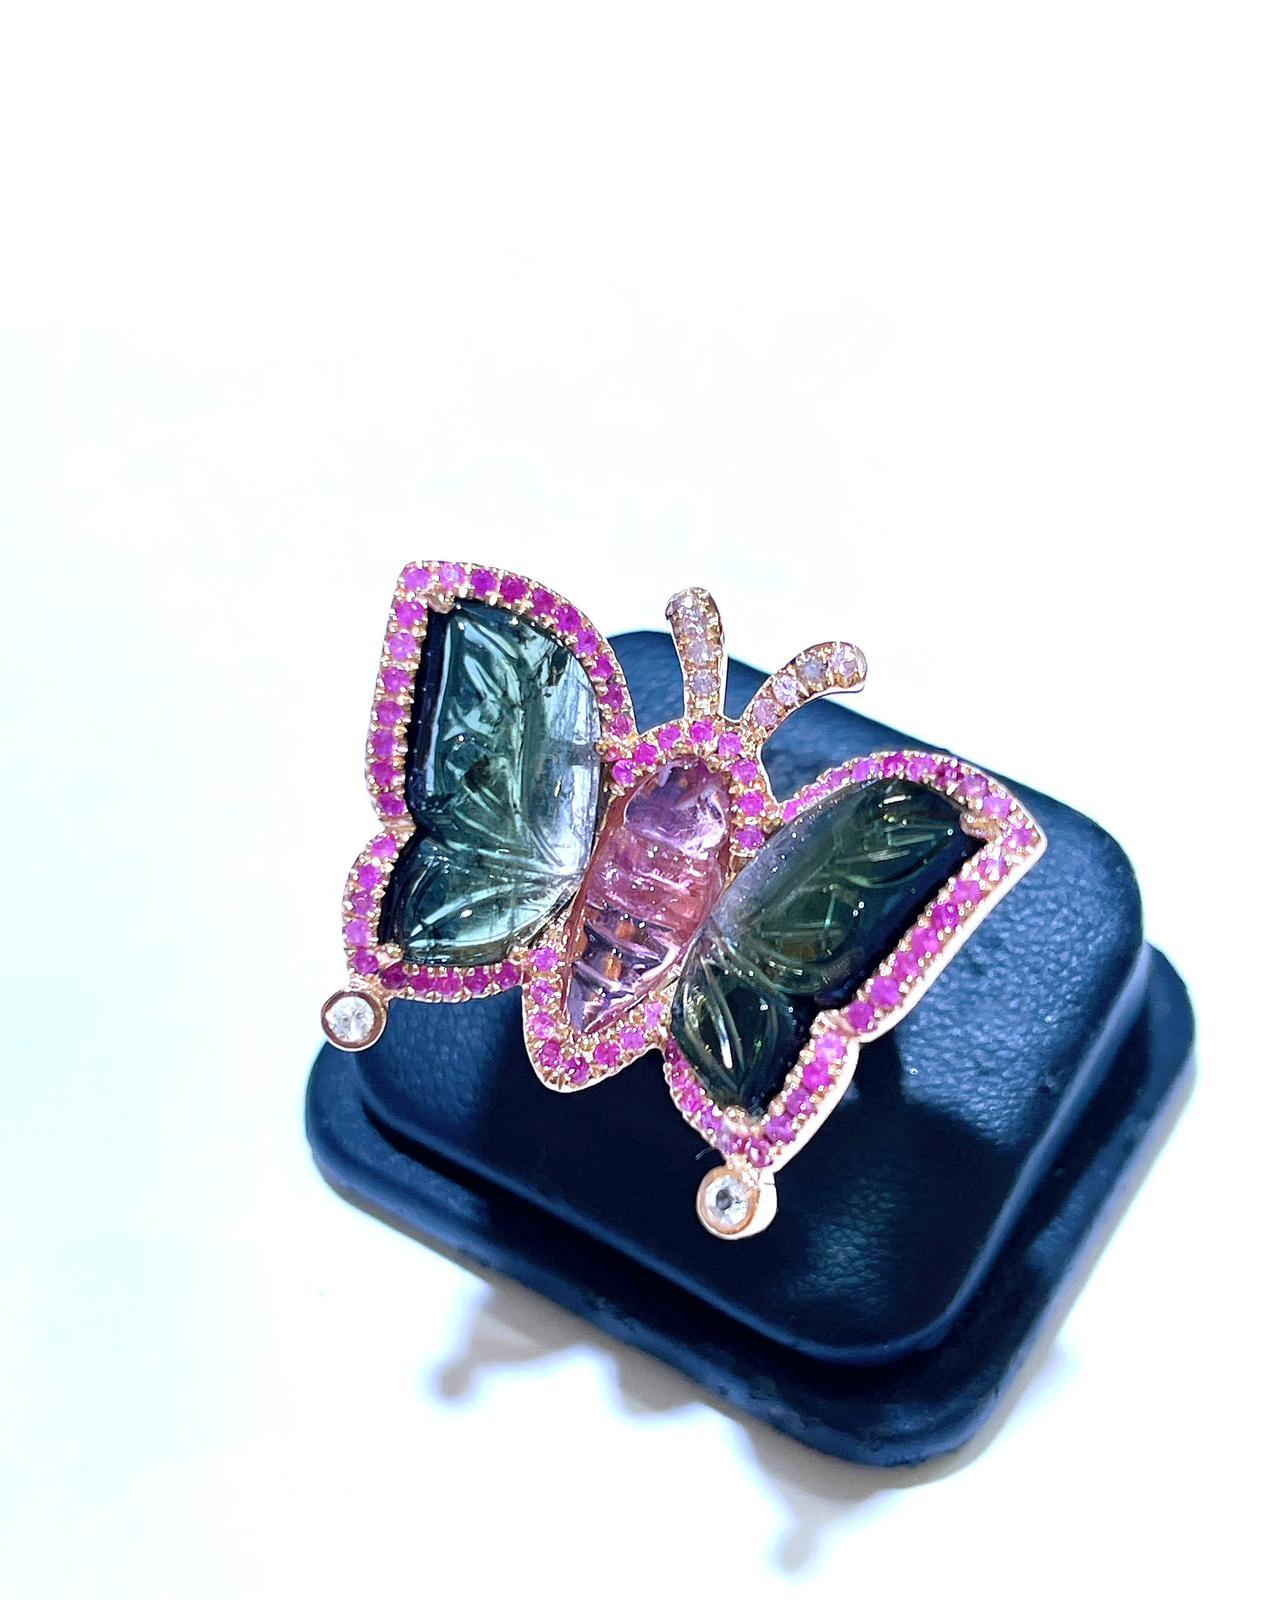 Bochic “Orient” Pink Sapphires & Tourmaline Ring Set In 18K Gold & Silver  For Sale 1